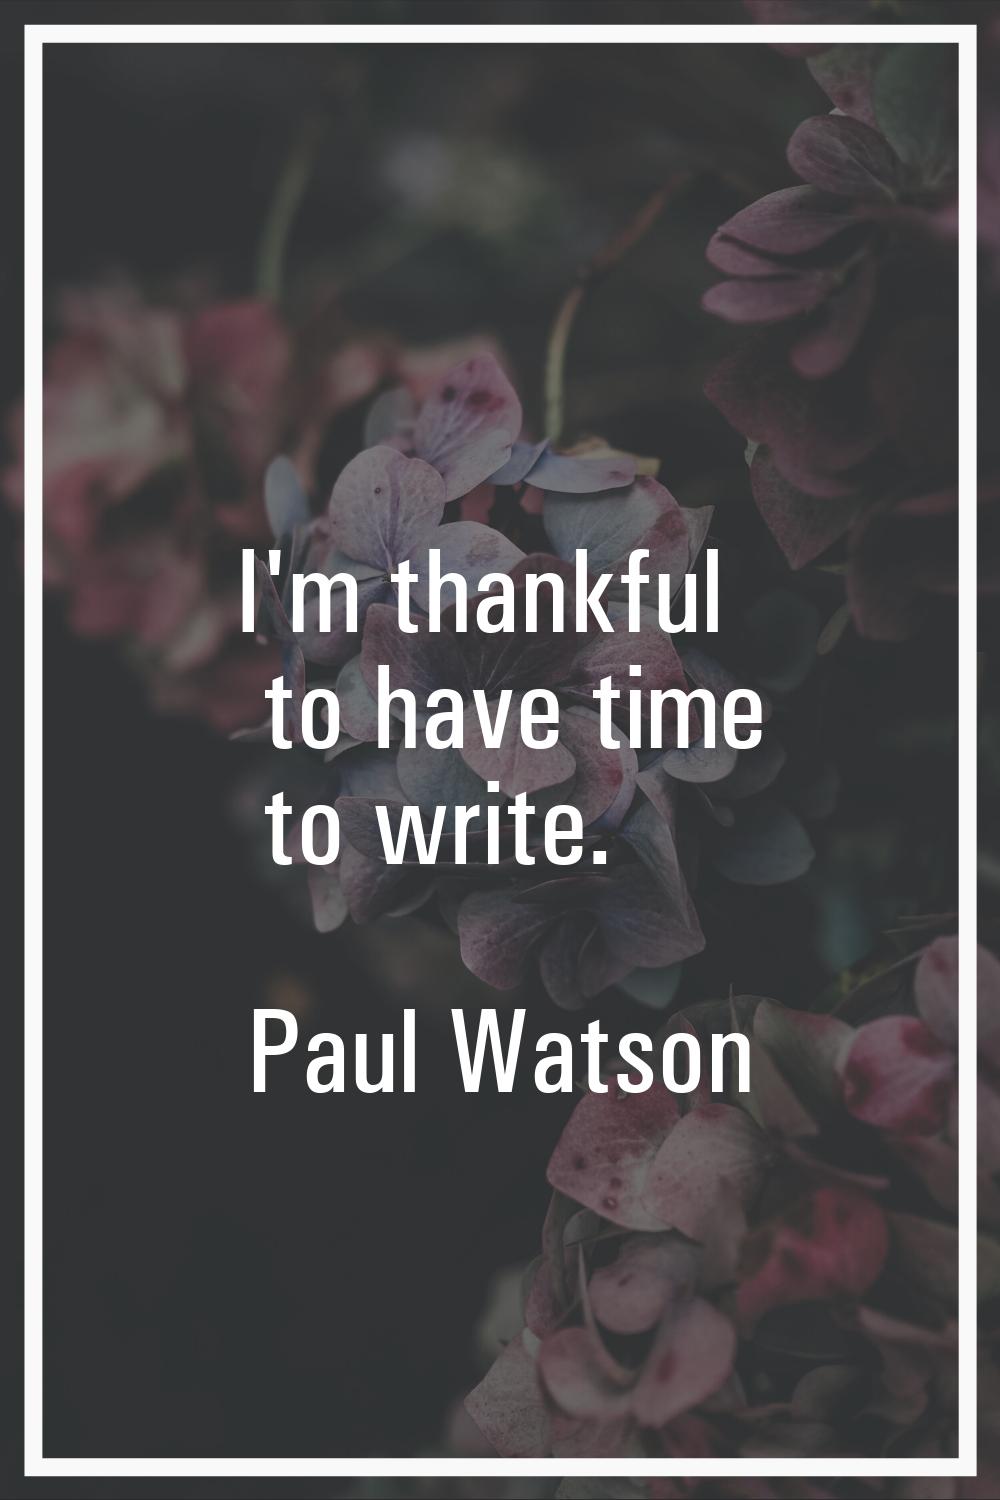 I'm thankful to have time to write.